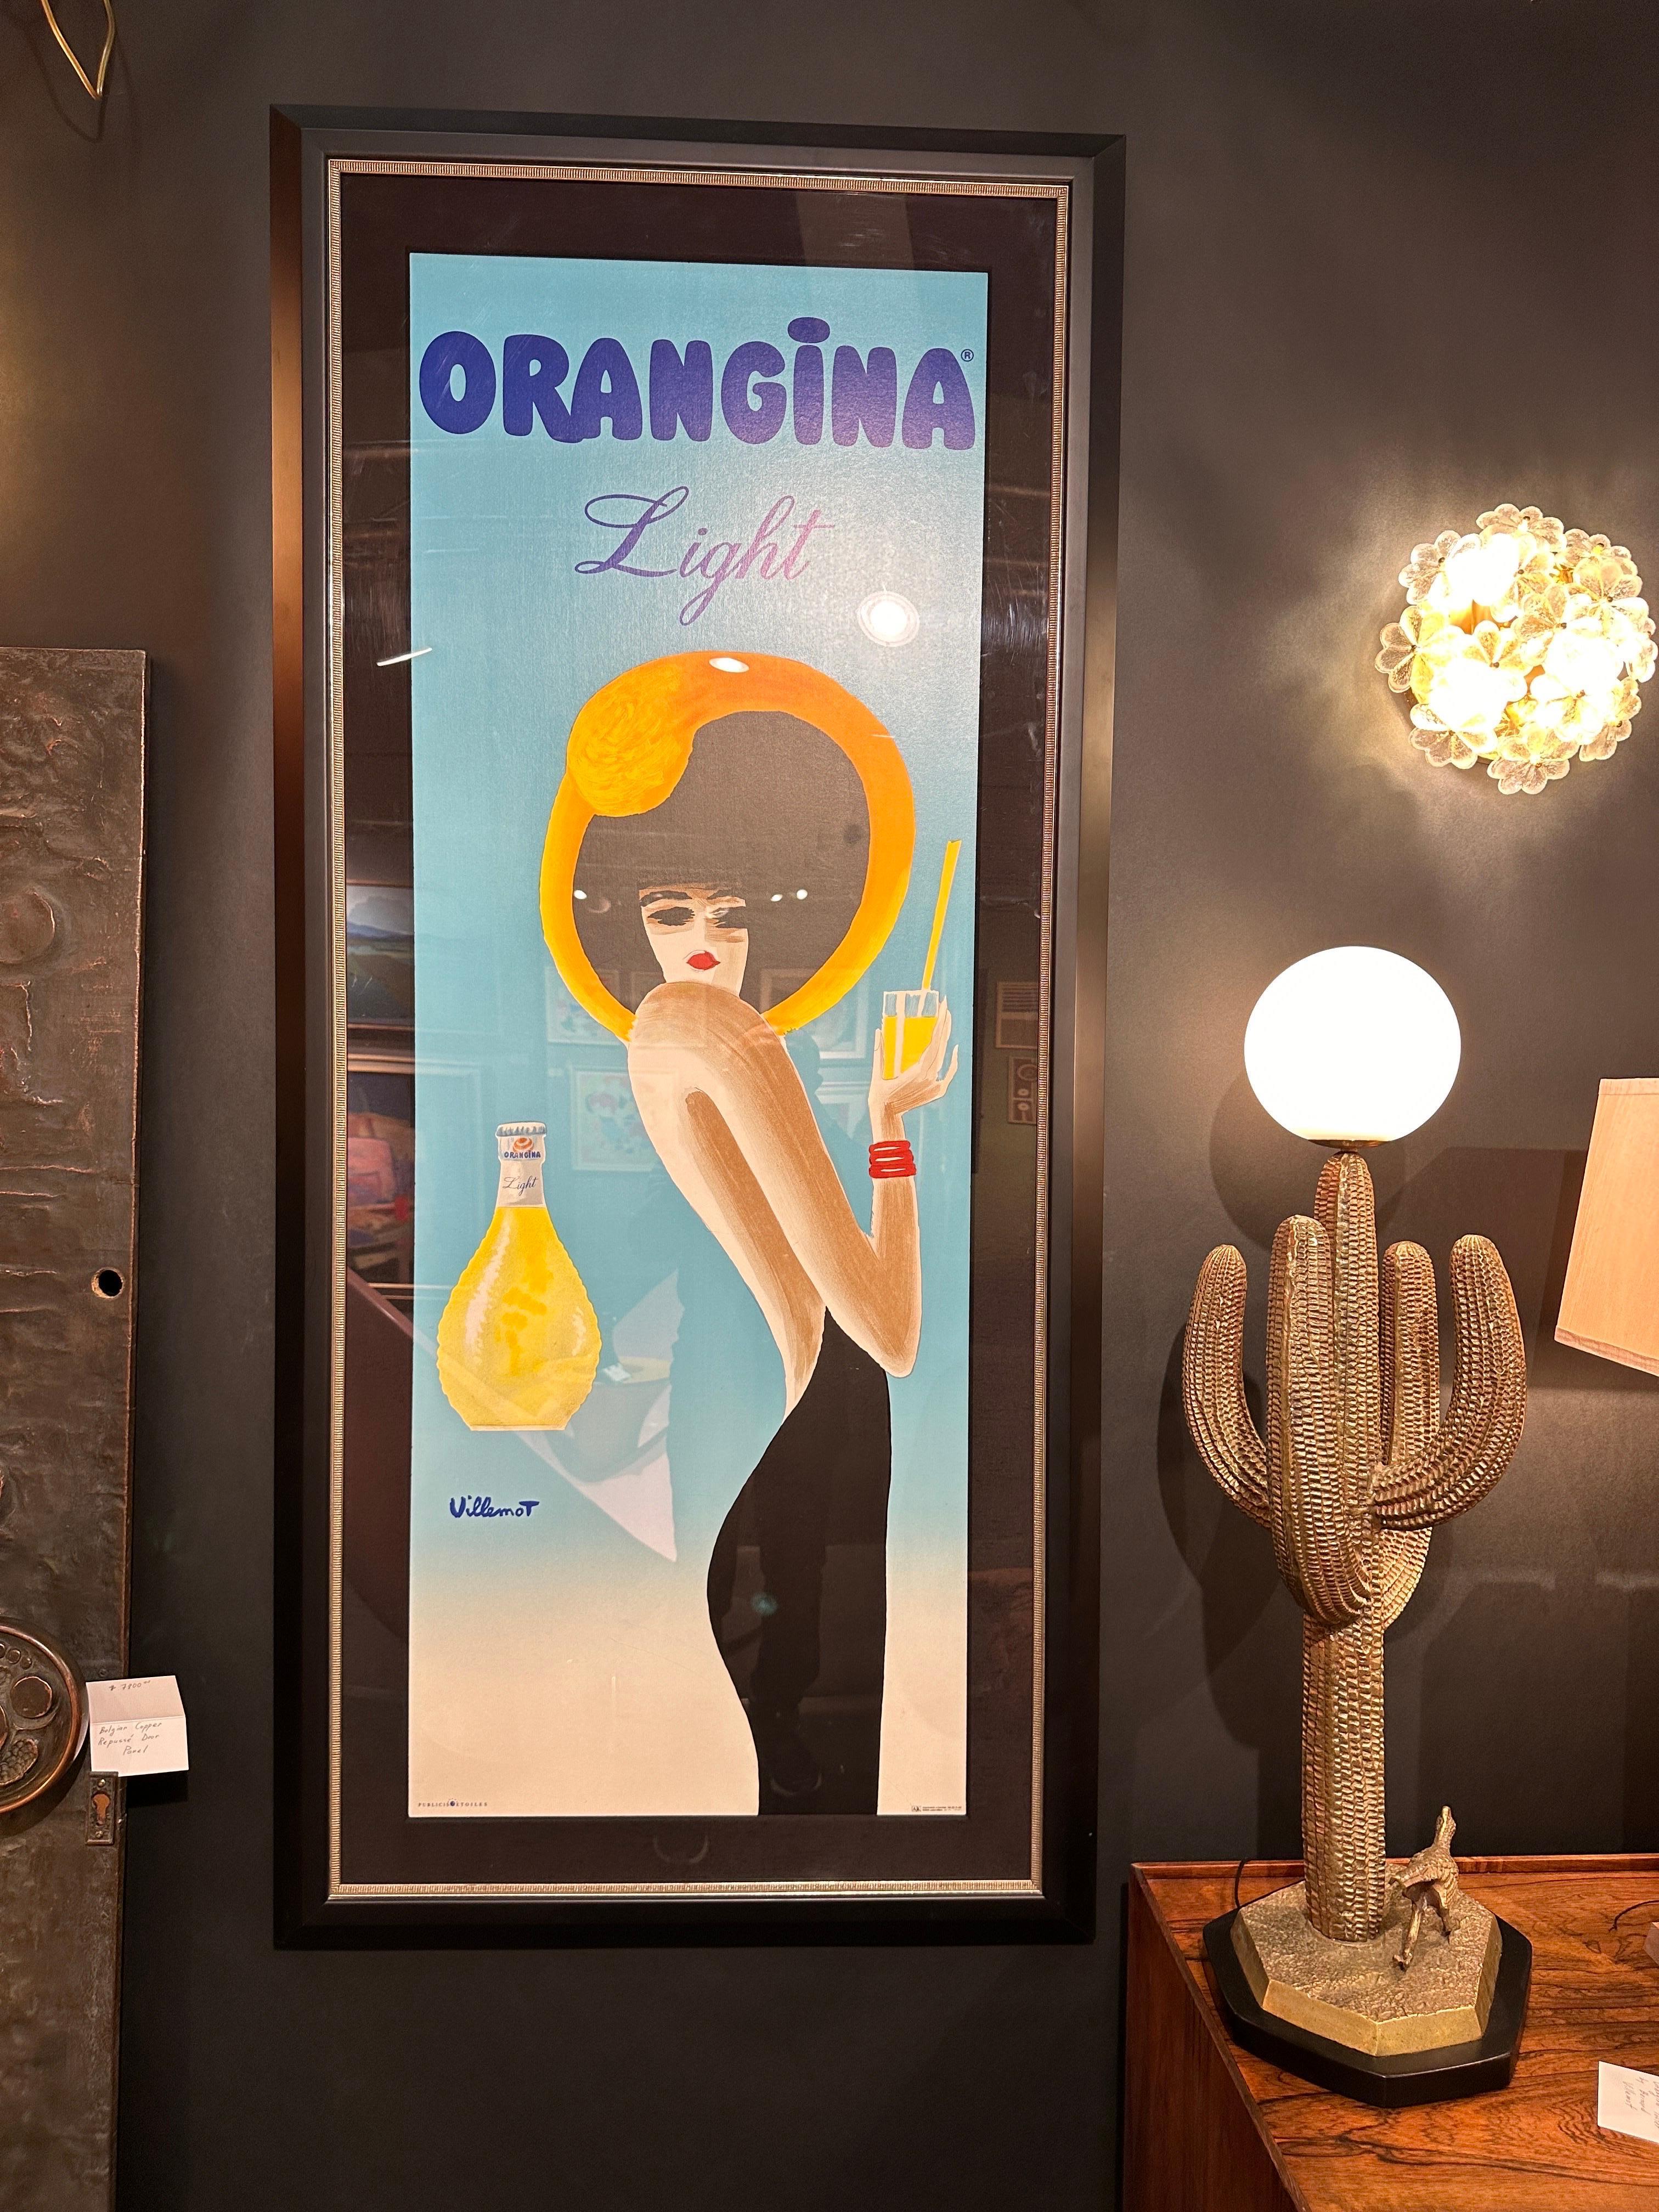 Rare framed “Orangina” poster by French artist Bernard Villemot. Poster is linen backed and protected under acrylic sheet. Frame is mat black with silver trim.